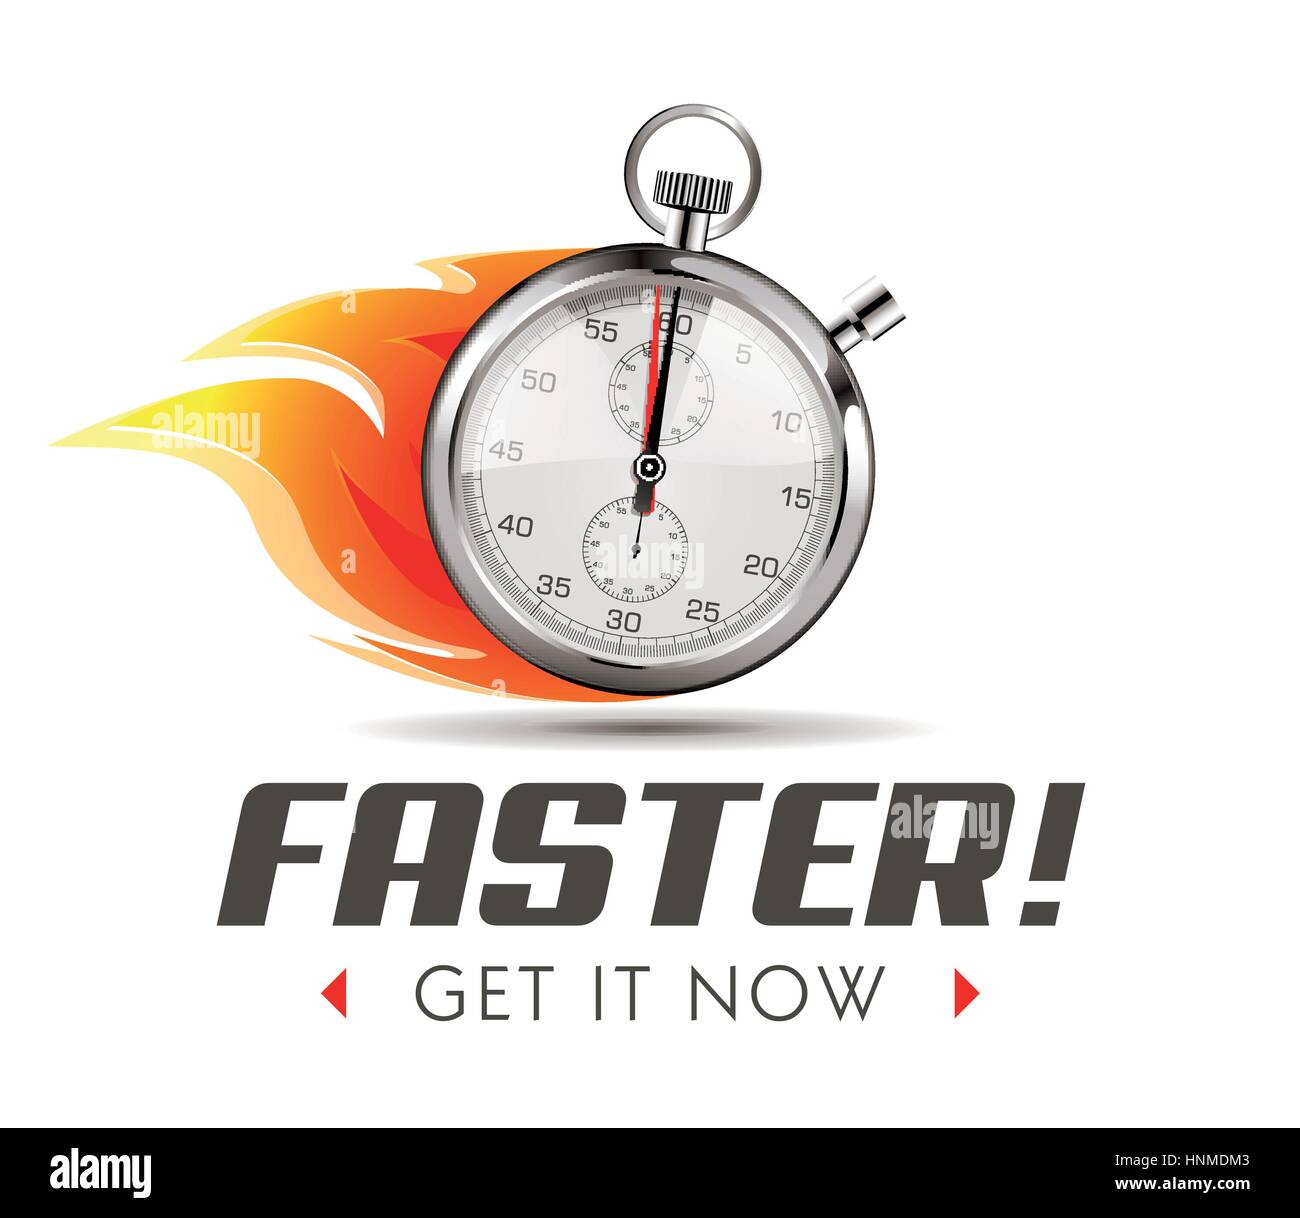 Faster - time is running out - Stopwatch concept Stock Vector